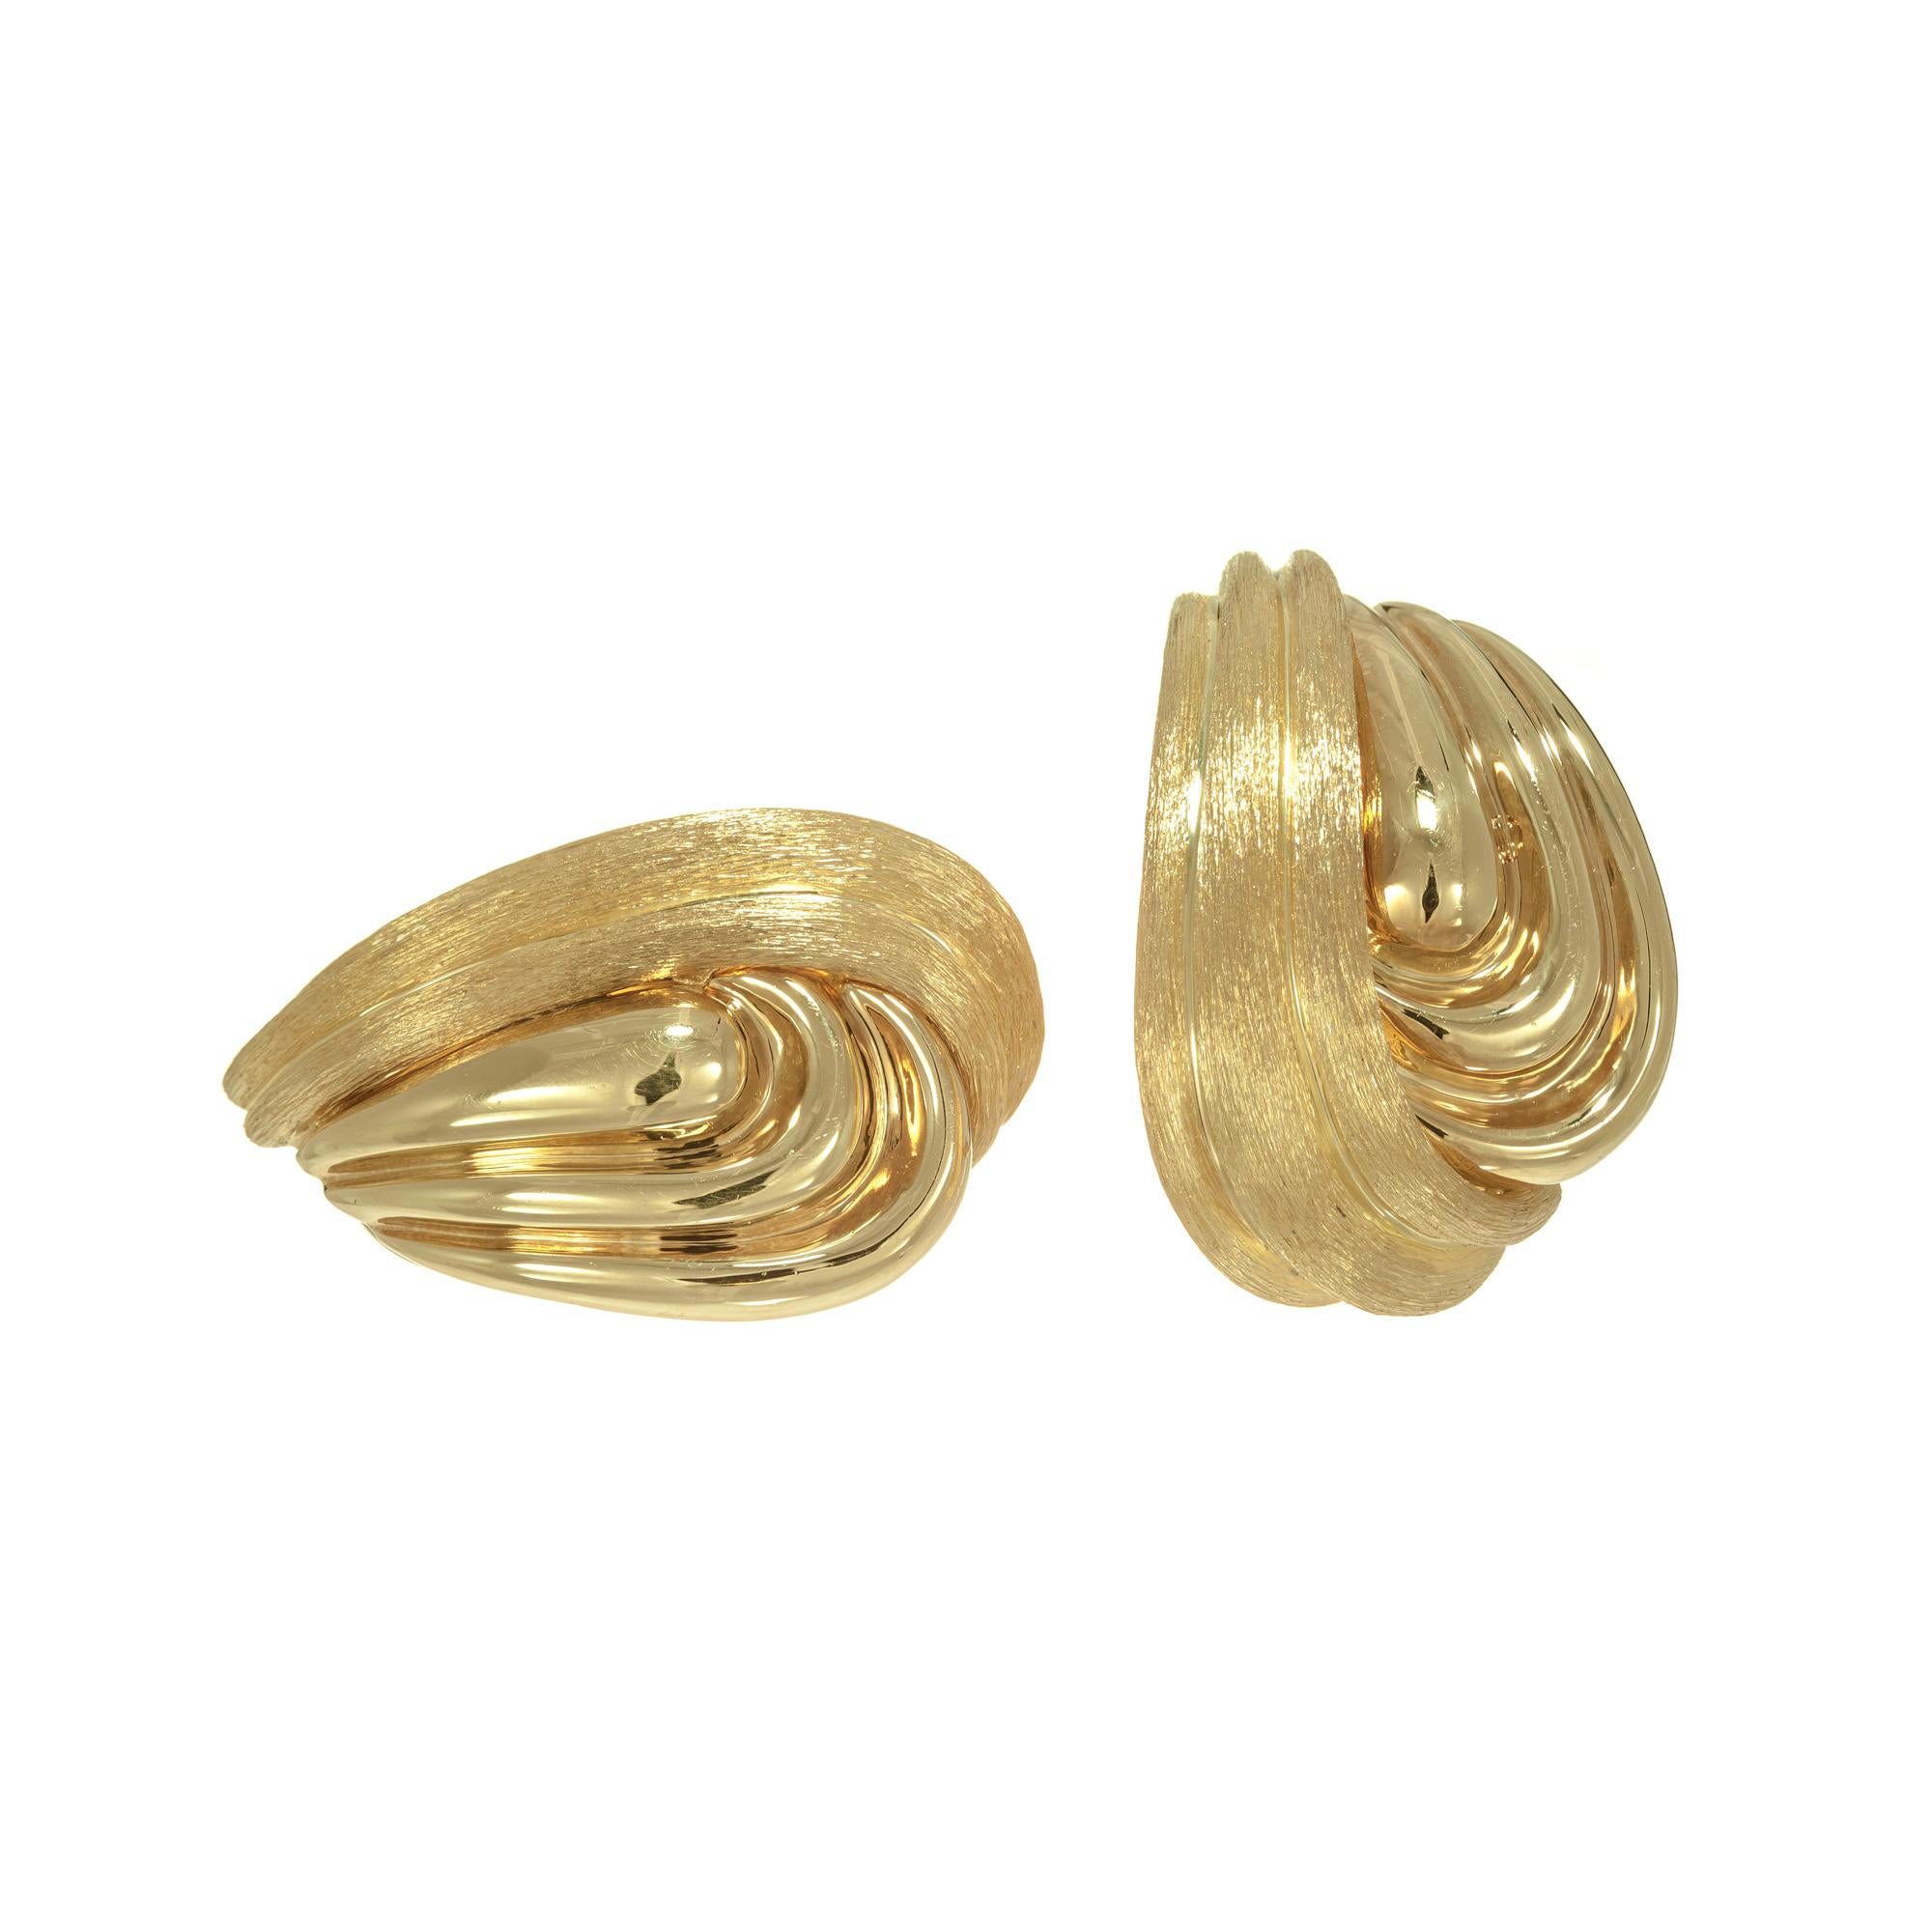 Henry Dunay clip and post 18k yellow gold textured swirl design earrings

18k yellow gold 
Stamped: 750
Hallmark: Dunay
24.2 grams
Top to bottom: 29.8mm or 1 1/8 Inch
Width: 18.96mm or ¾ Inch
Depth or thickness: 7.2mm
